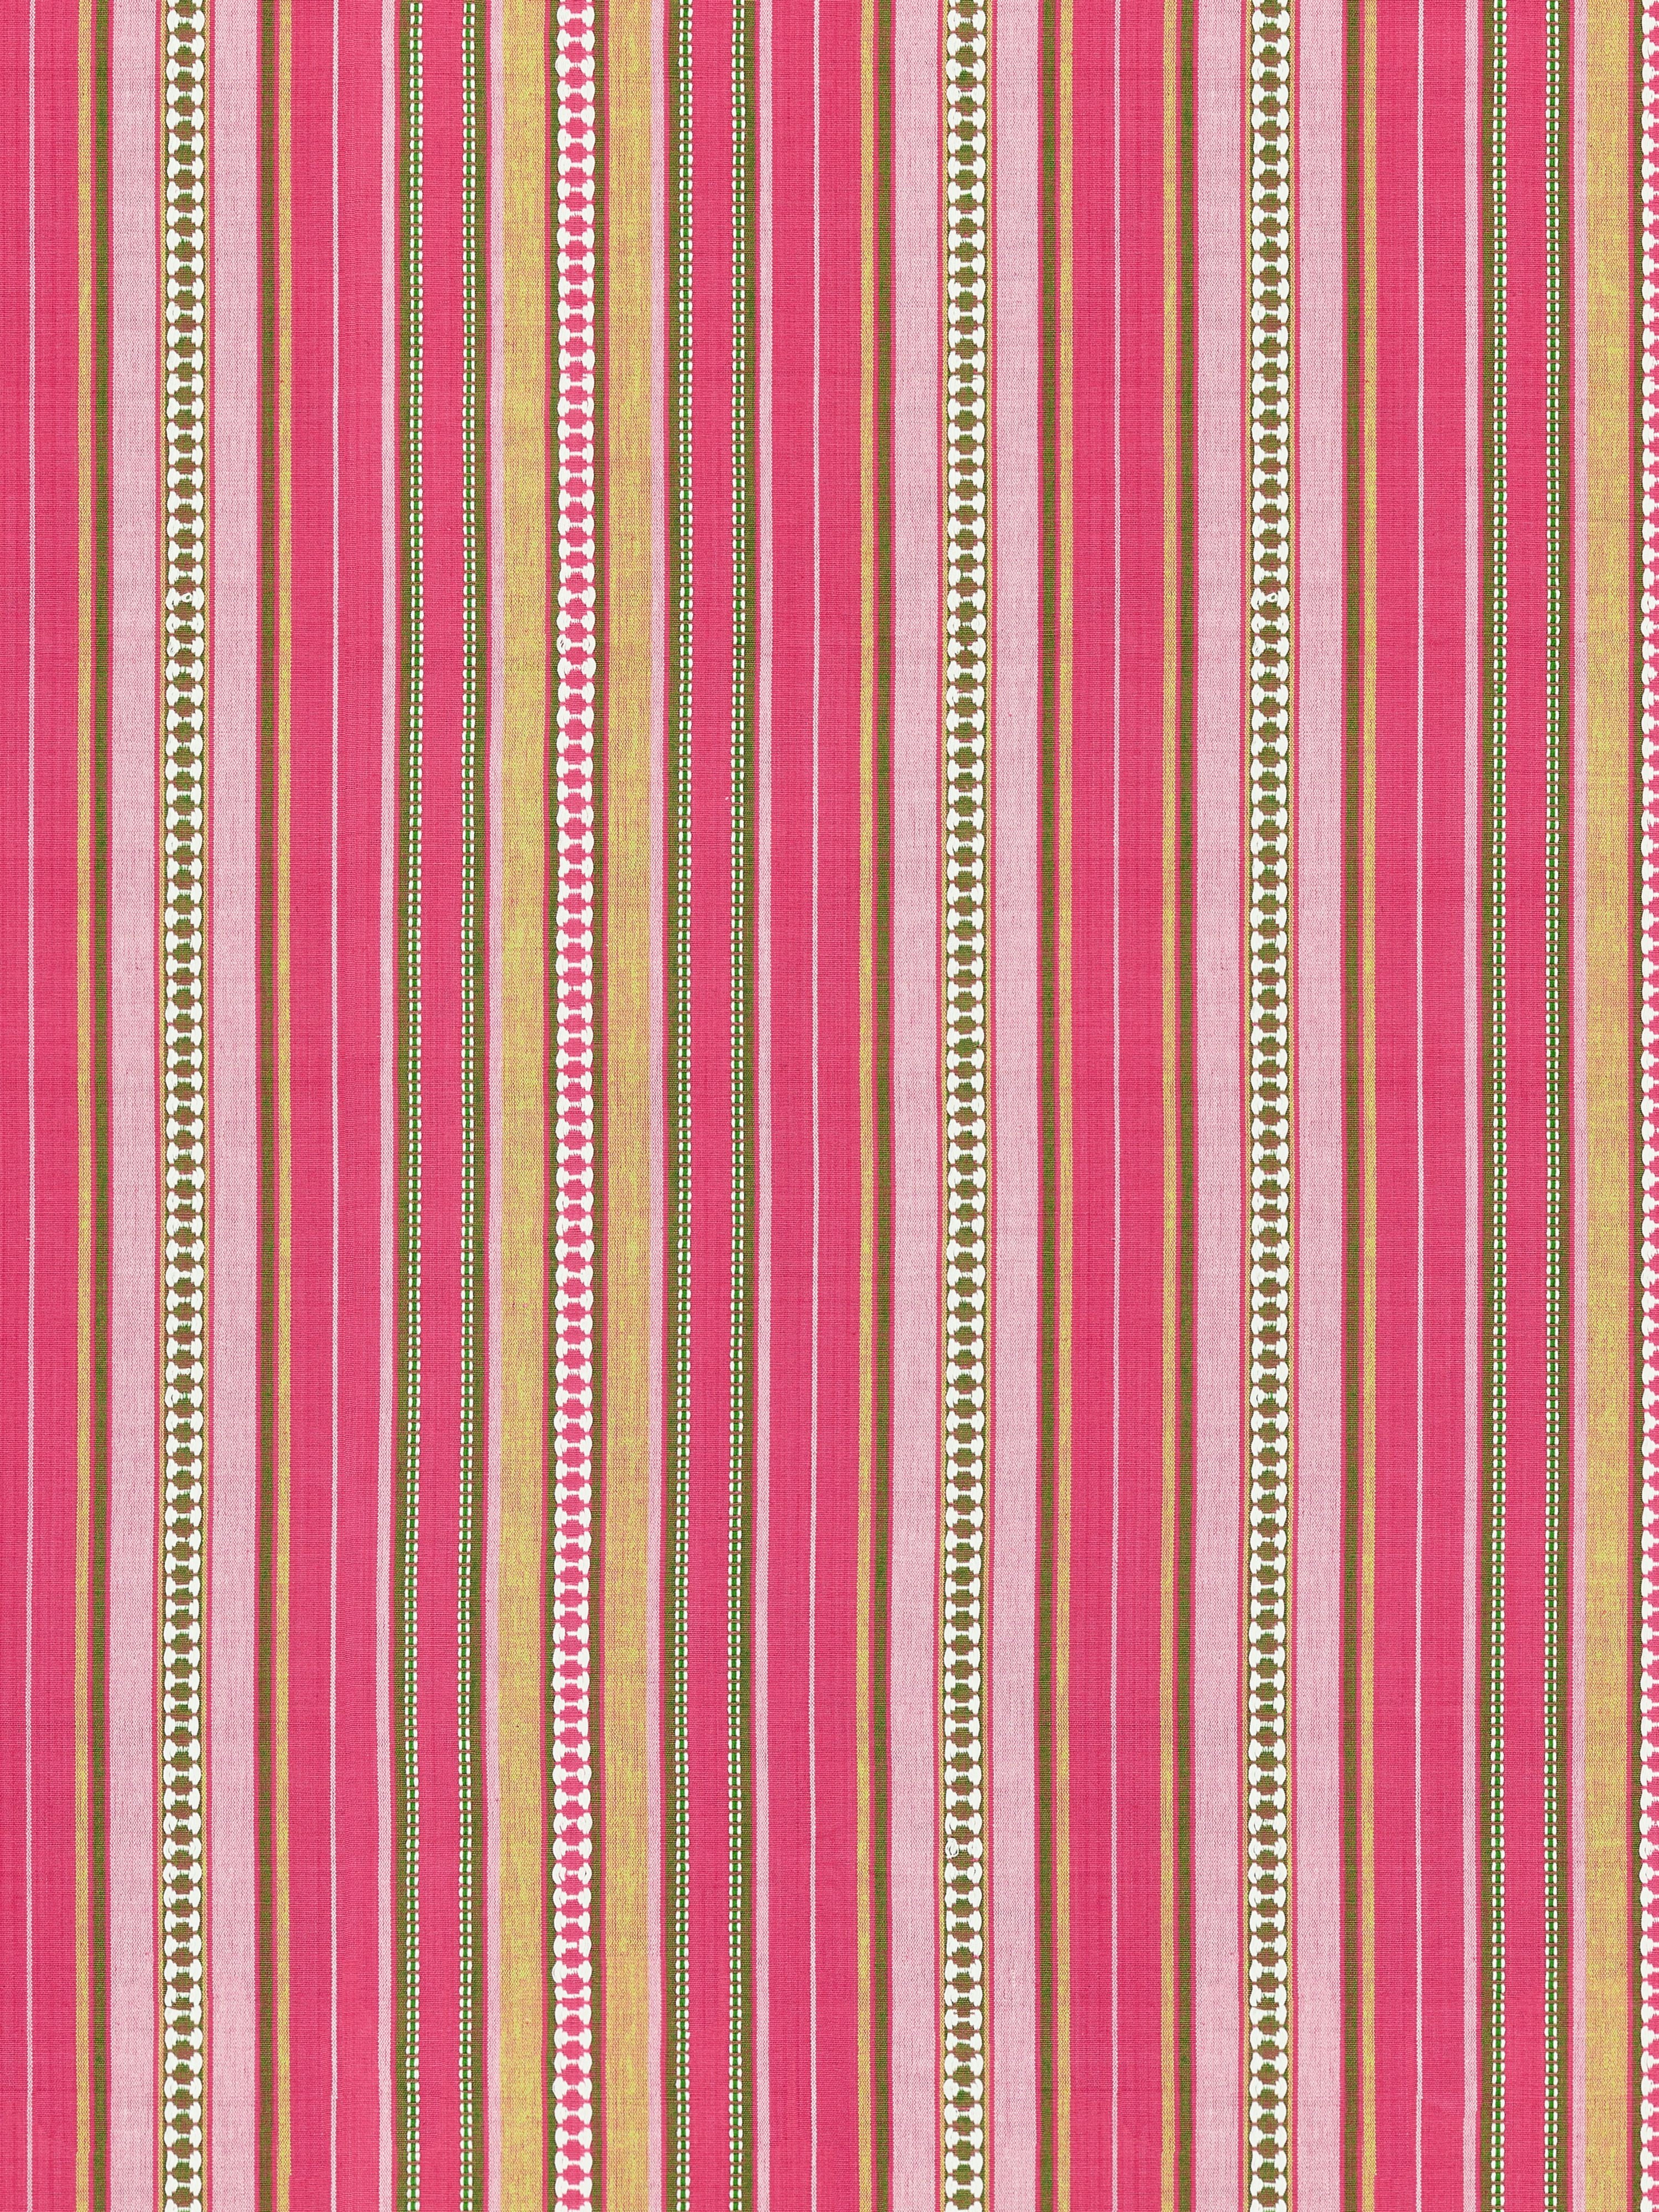 Nile Stripe fabric in rose garden color - pattern number SC 000327253 - by Scalamandre in the Scalamandre Fabrics Book 1 collection